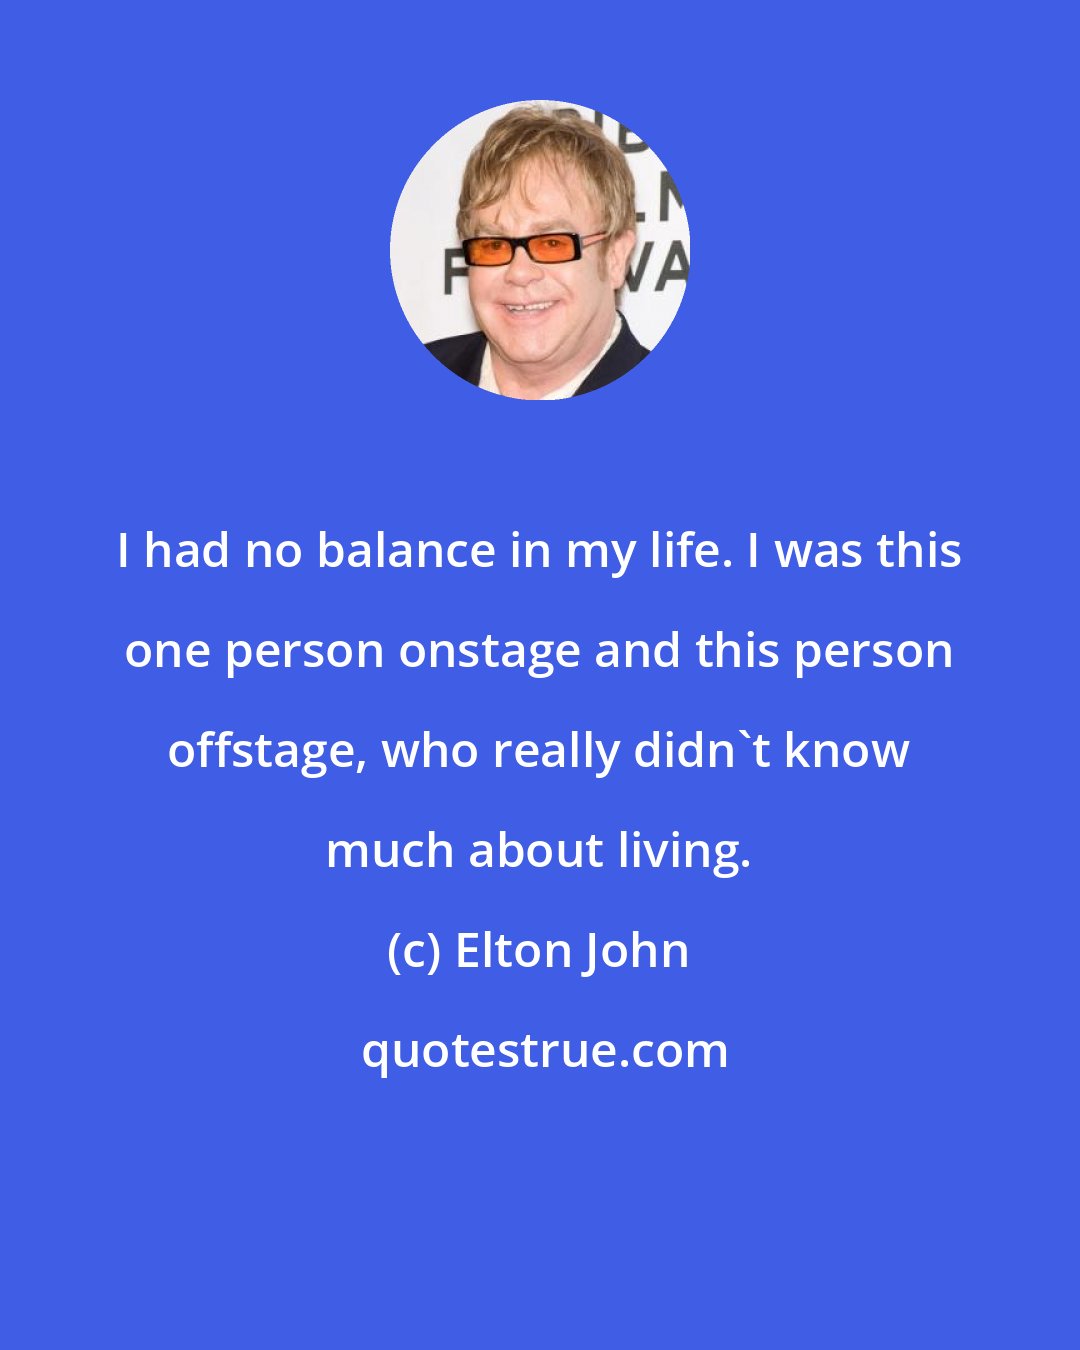 Elton John: I had no balance in my life. I was this one person onstage and this person offstage, who really didn't know much about living.